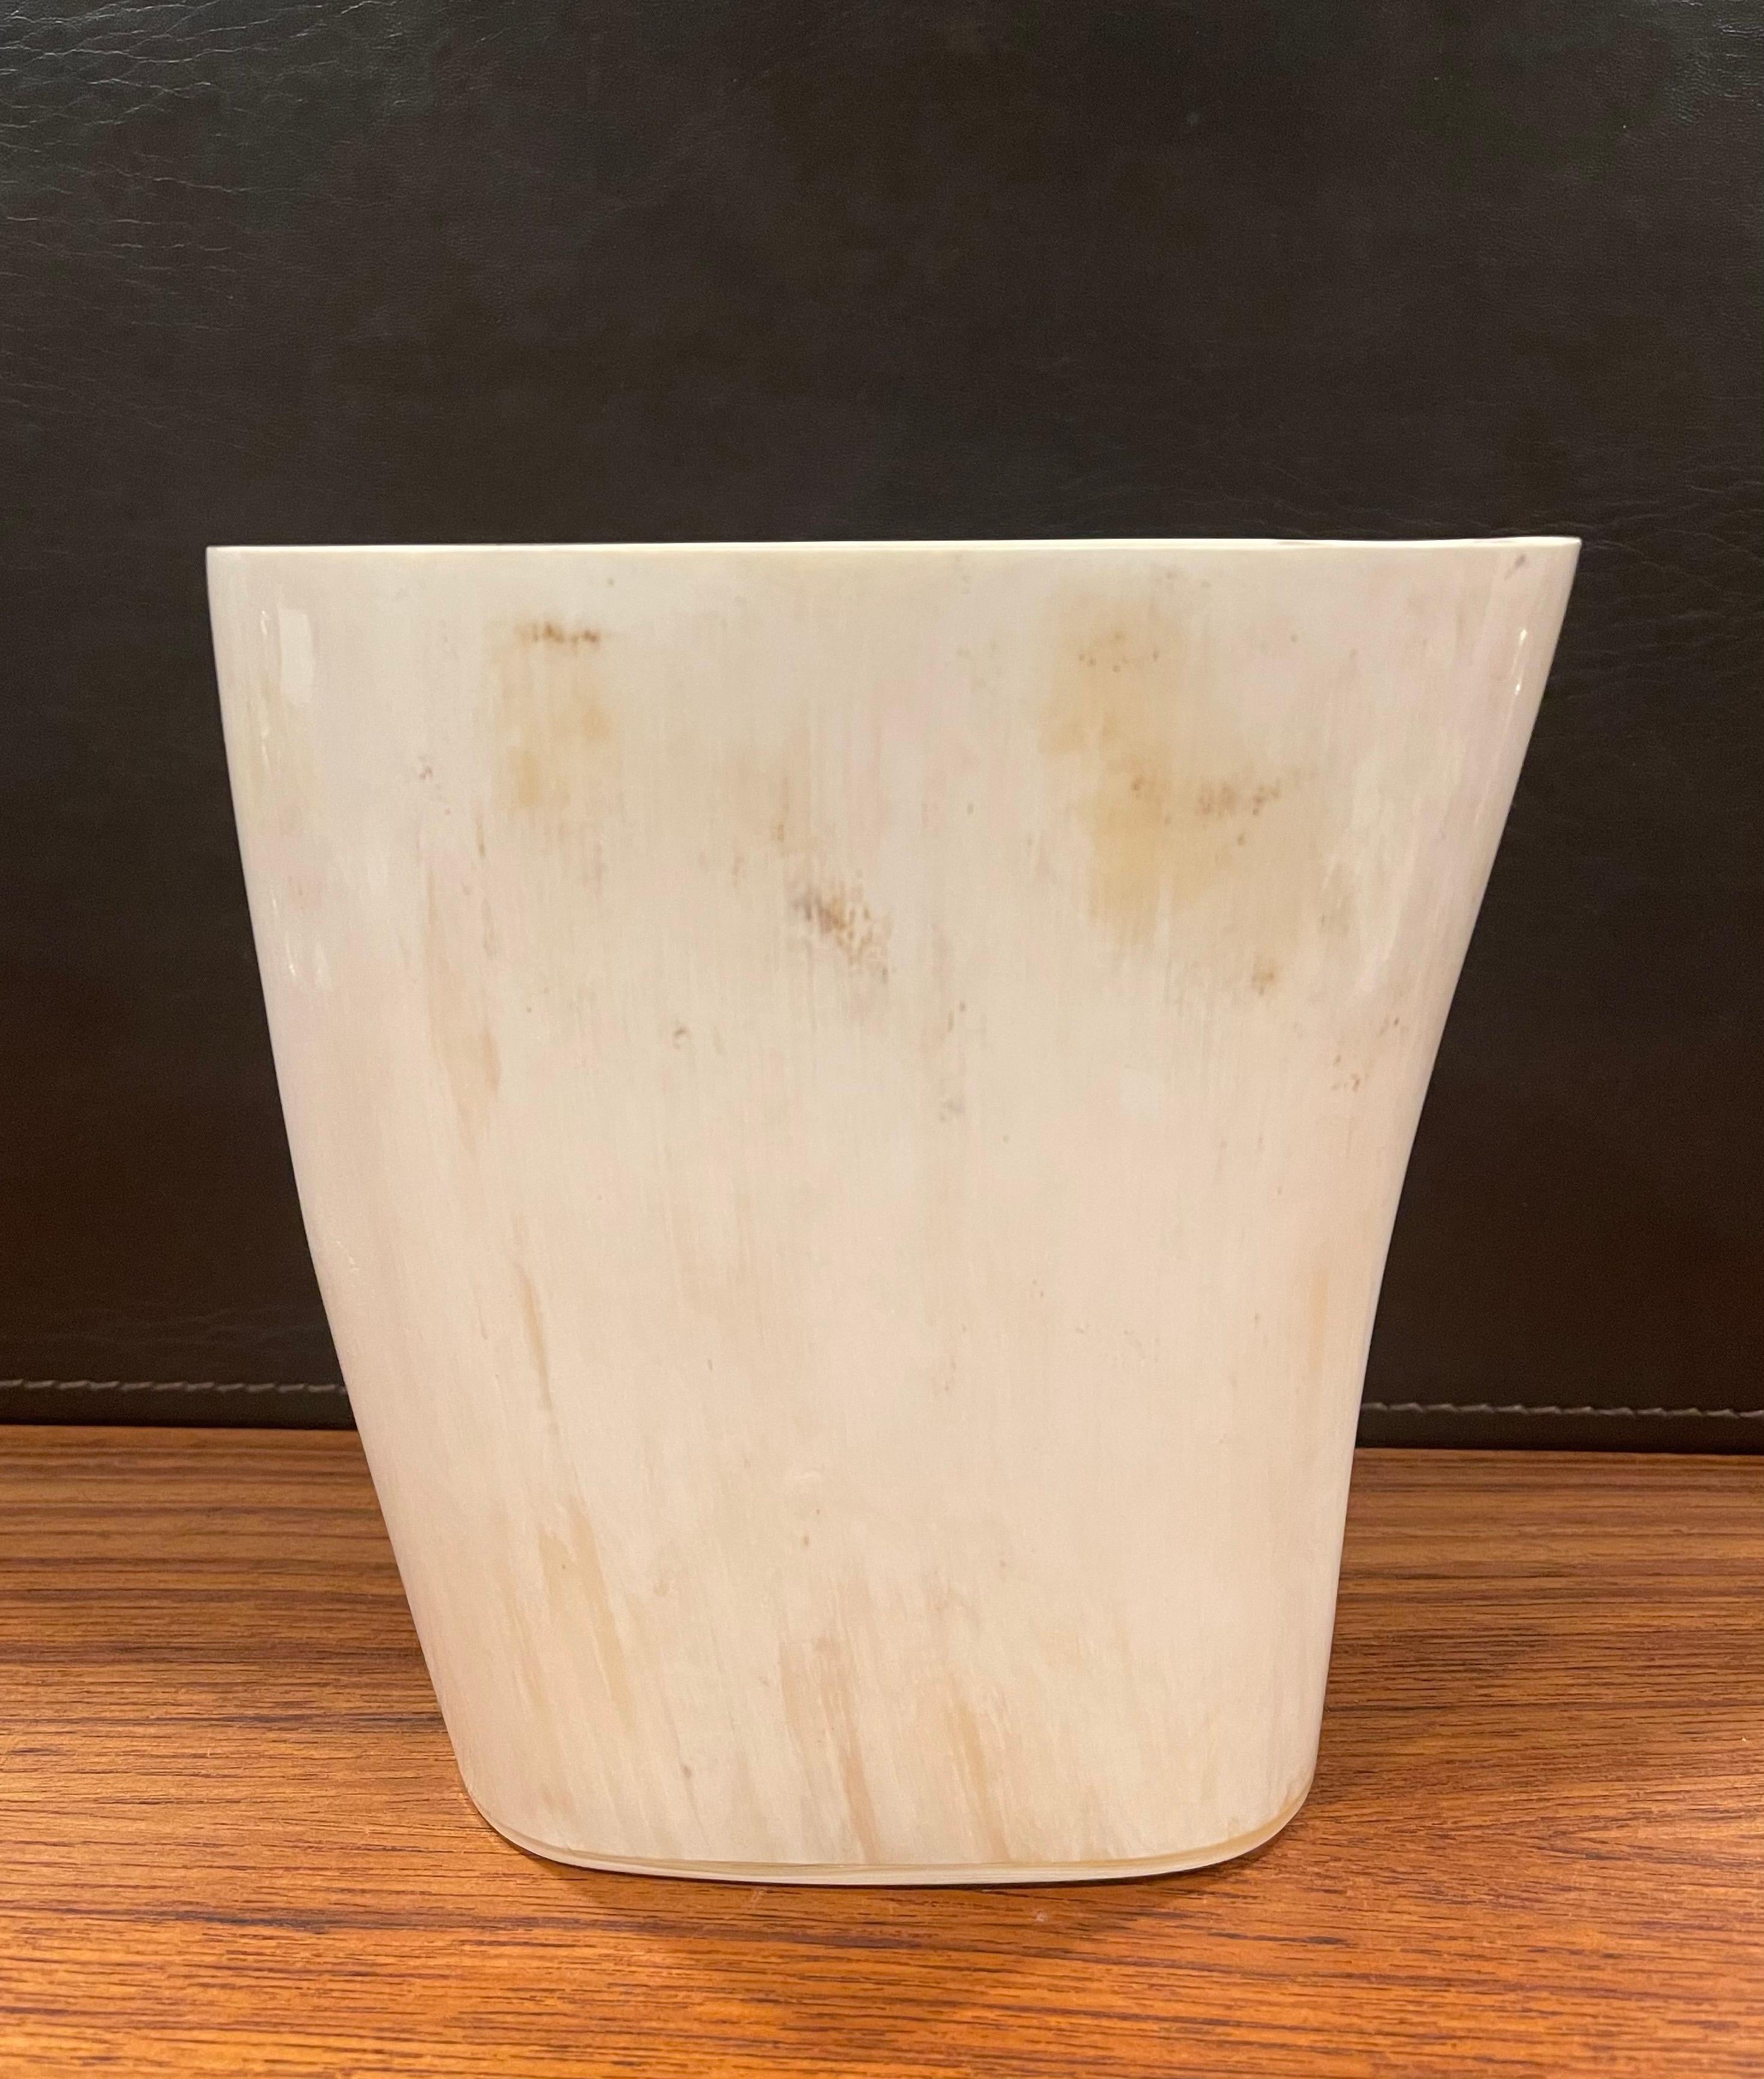 Gorgeous, well crafted horn vase by Arcahorn of Italy, circa 2000s. The piece is in great condition and very solid; it measures 6.5